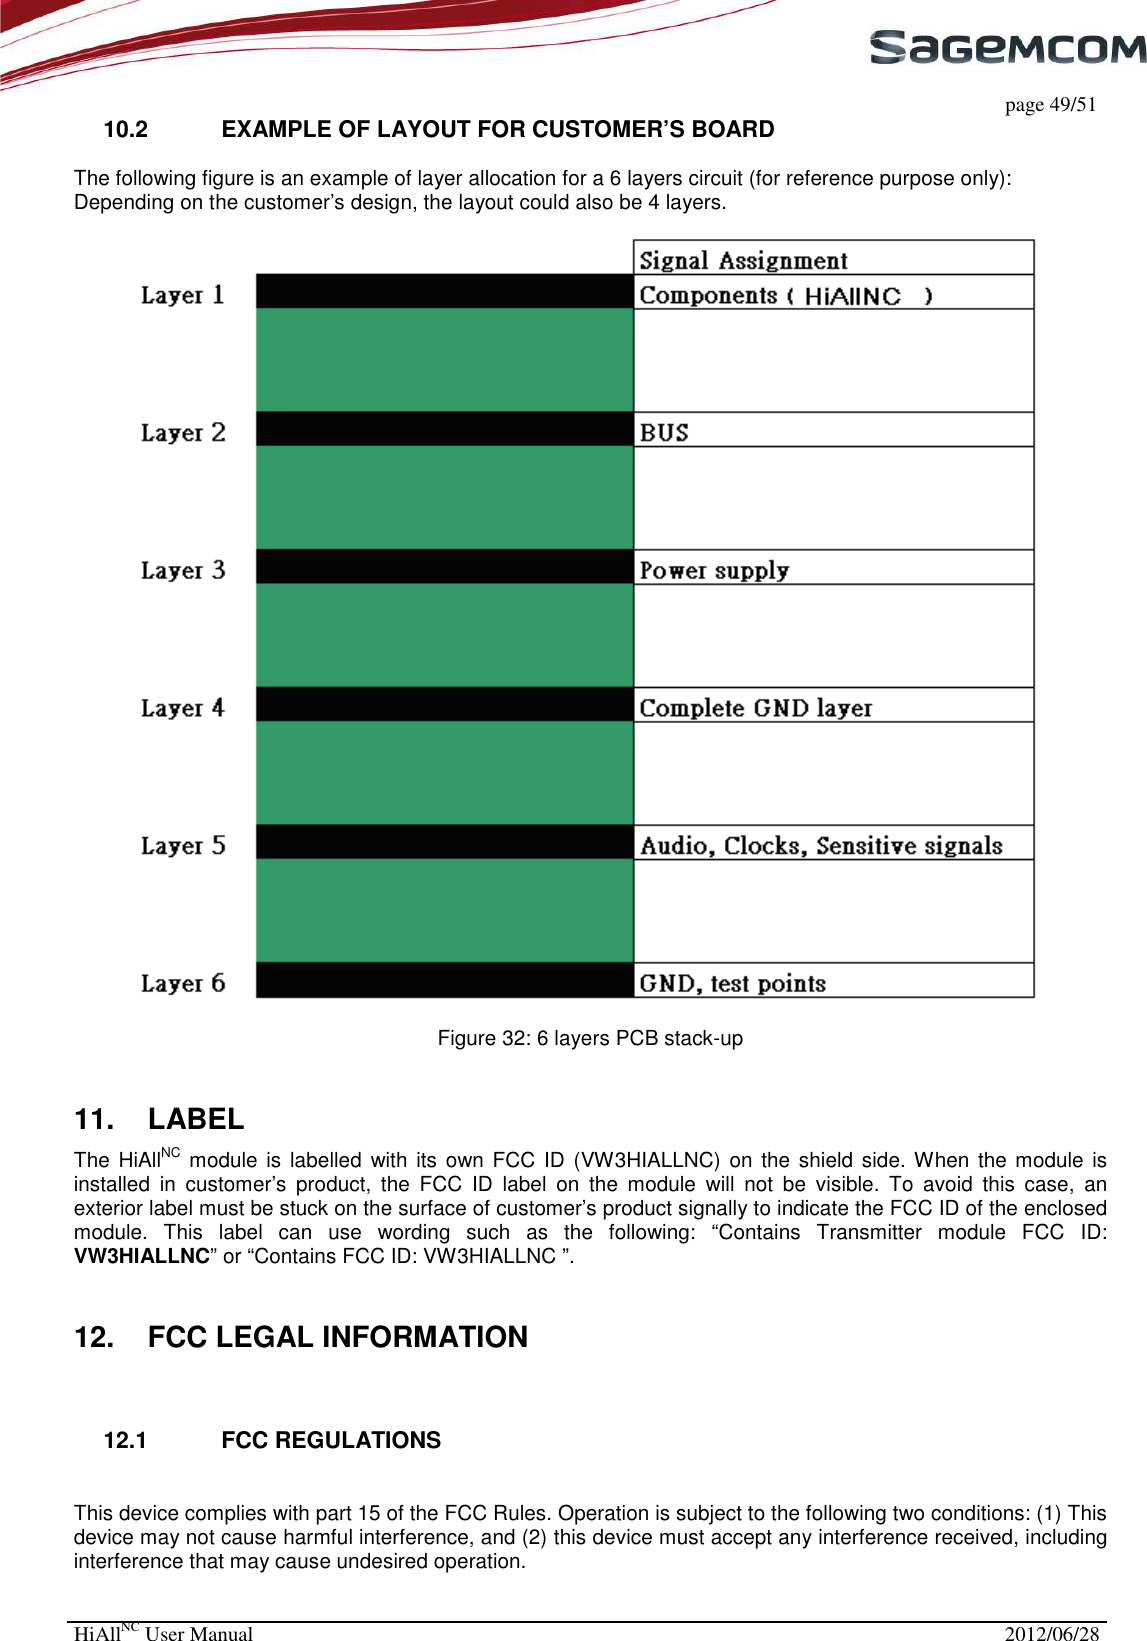     page 49/51 HiAllNC User Manual  2012/06/28  10.2  EXAMPLE OF LAYOUT FOR CUSTOMER’S BOARD The following figure is an example of layer allocation for a 6 layers circuit (for reference purpose only): Depending on the customer’s design, the layout could also be 4 layers.    Figure 32: 6 layers PCB stack-up 11.  LABEL The  HiAllNC module is labelled  with its own FCC ID (VW3HIALLNC)  on the shield side. When the module is installed  in  customer’s  product,  the  FCC  ID  label  on  the  module  will  not  be  visible.  To  avoid  this  case,  an exterior label must be stuck on the surface of customer’s product signally to indicate the FCC ID of the enclosed module.  This  label  can  use  wording  such  as  the  following:  “Contains  Transmitter  module  FCC  ID: VW3HIALLNC” or “Contains FCC ID: VW3HIALLNC ”. 12.  FCC LEGAL INFORMATION  12.1  FCC REGULATIONS  This device complies with part 15 of the FCC Rules. Operation is subject to the following two conditions: (1) This device may not cause harmful interference, and (2) this device must accept any interference received, including interference that may cause undesired operation.  